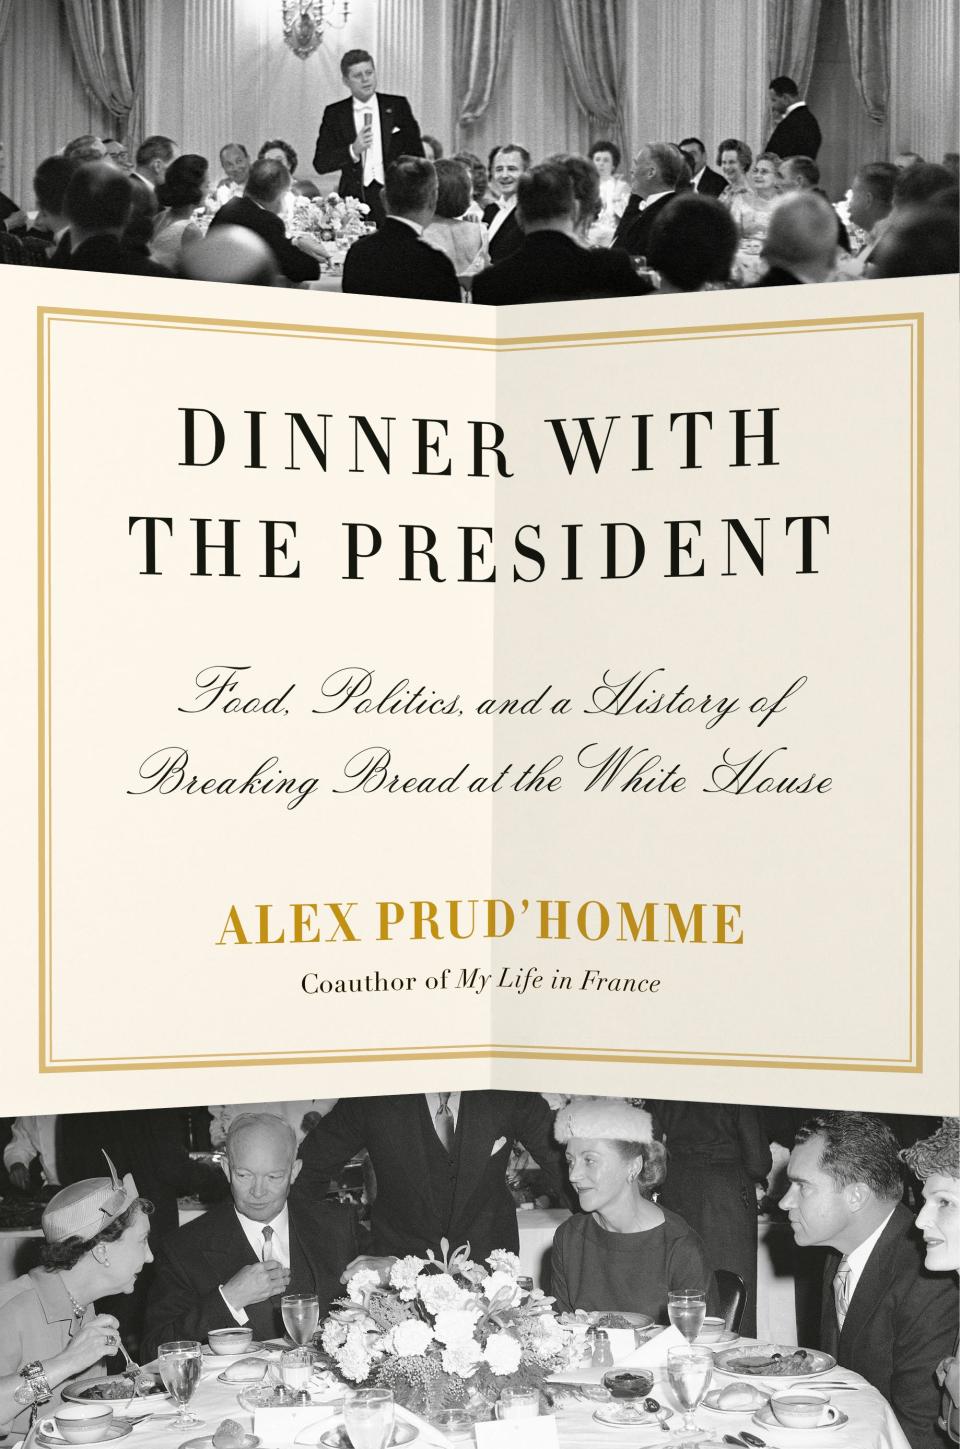 Dinner with President author author virtual event coming up at Dearborn Public Library.